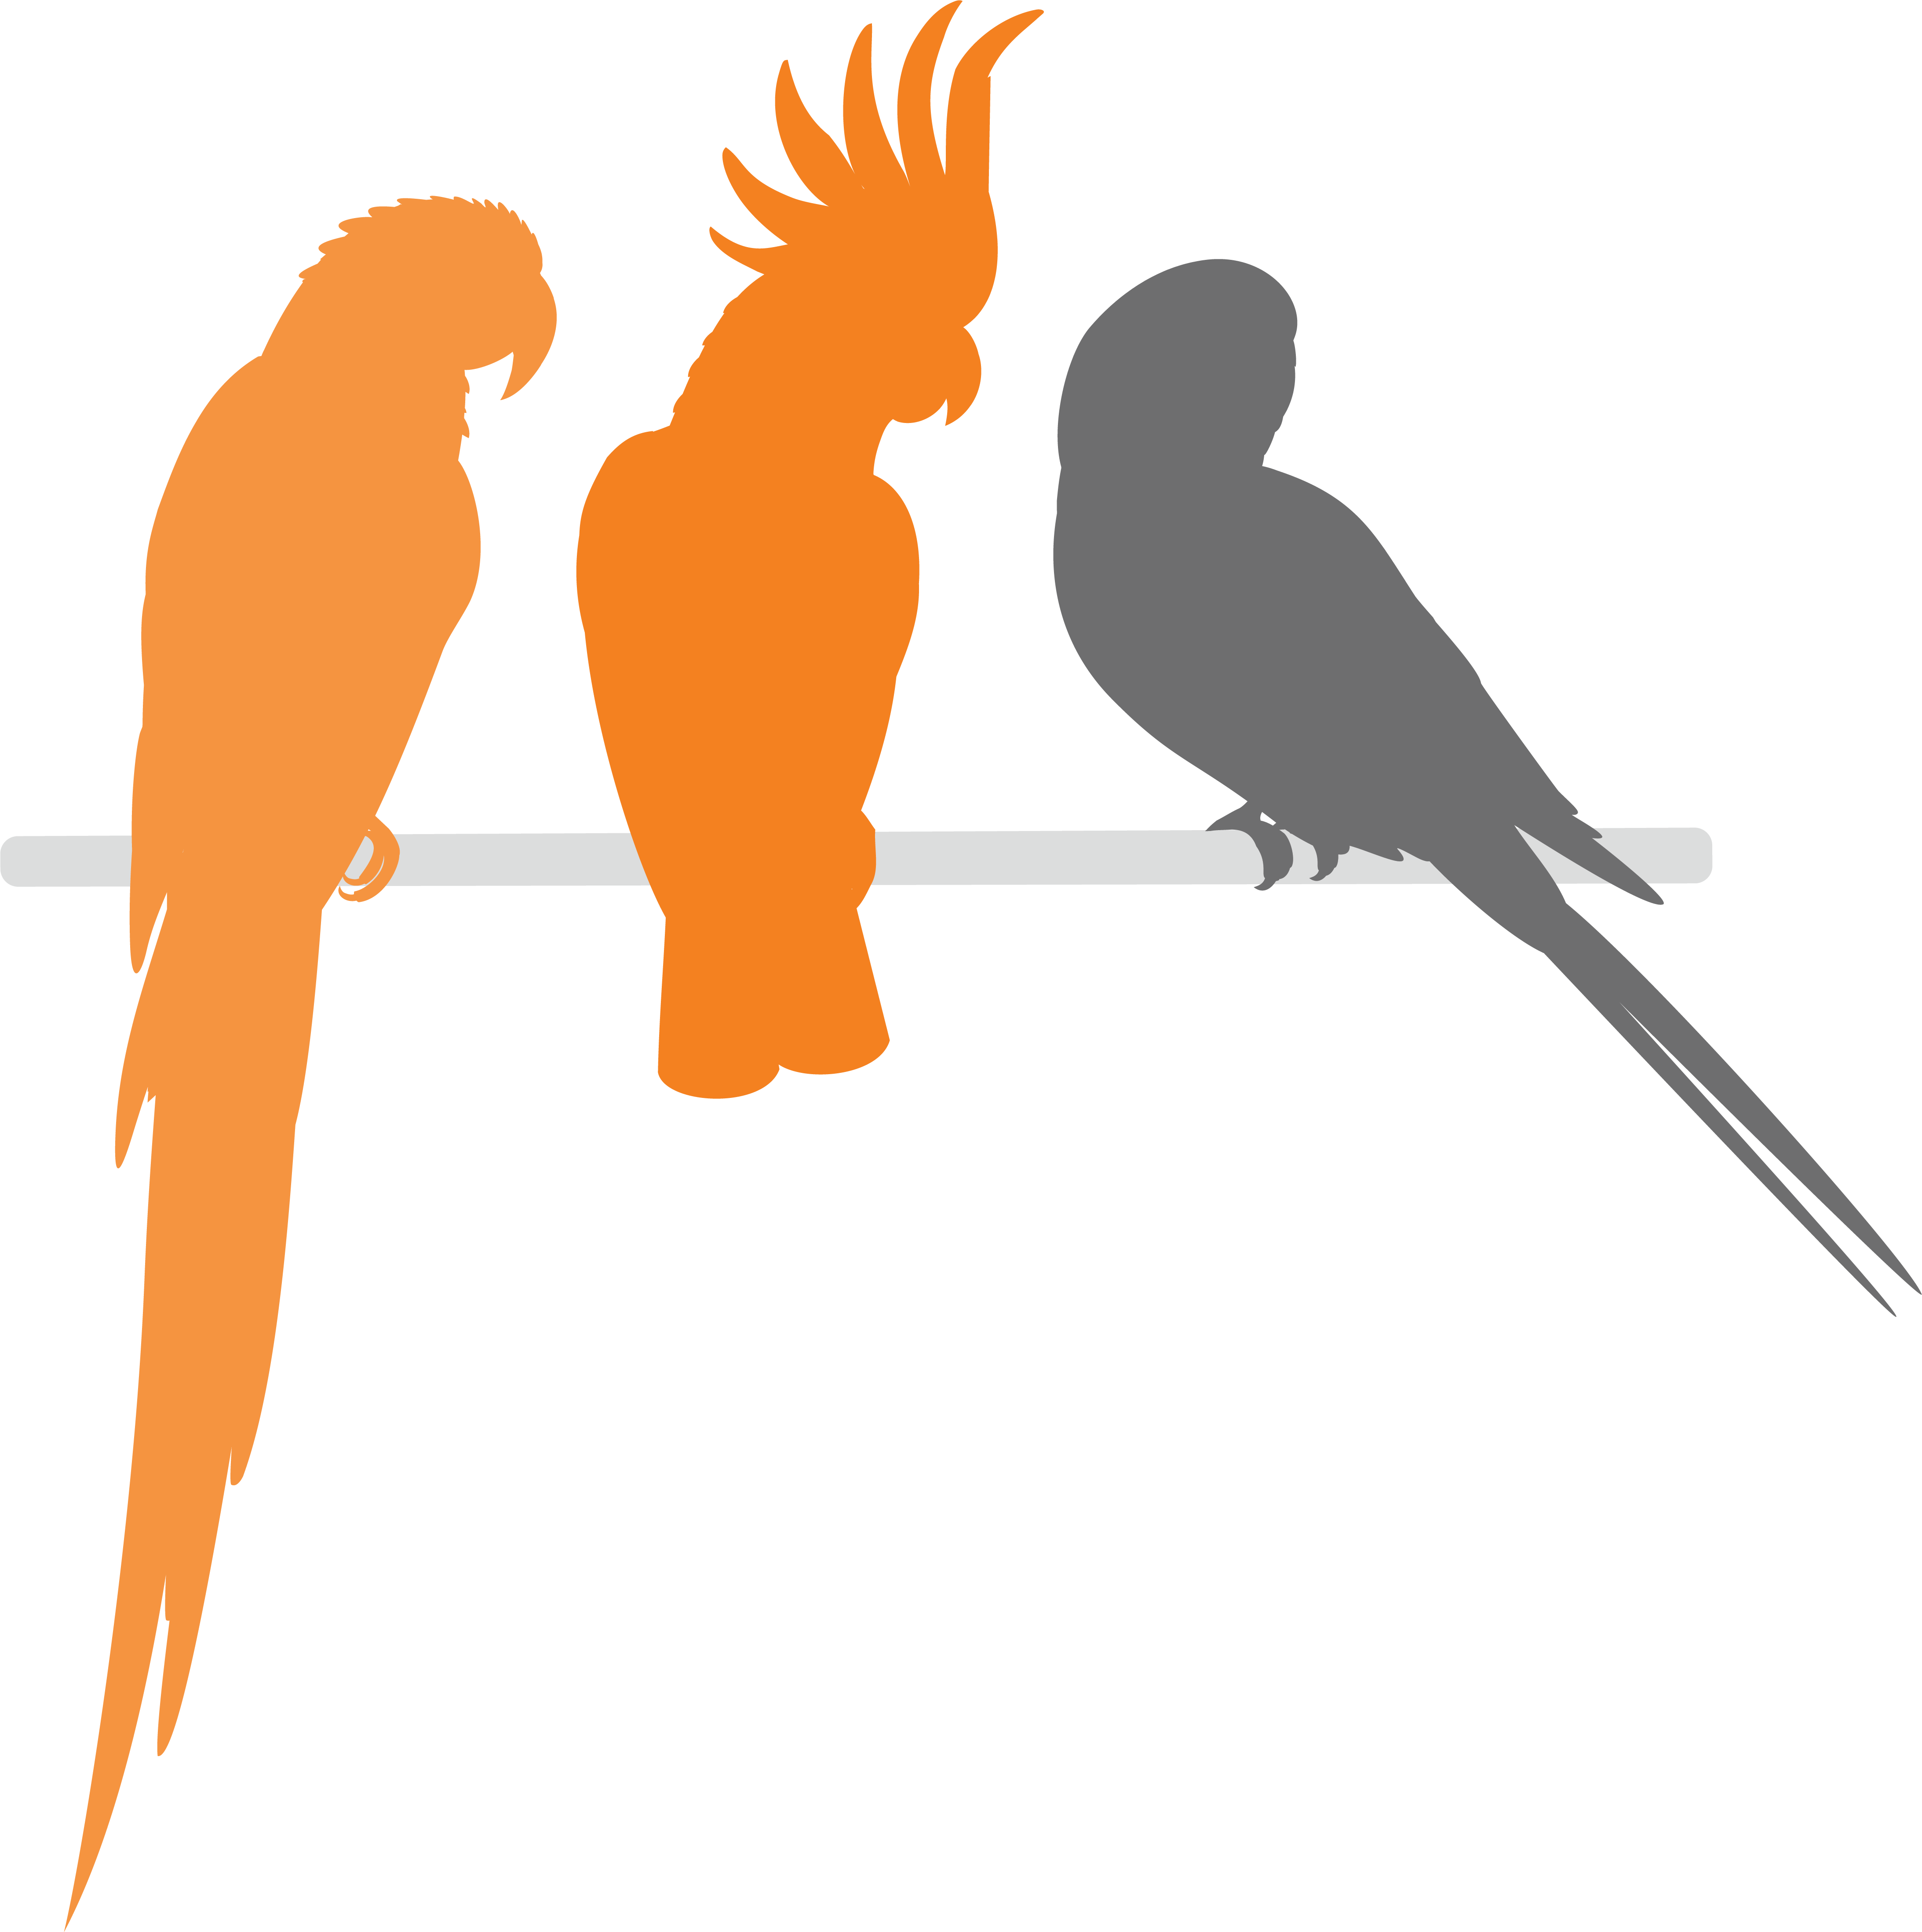 3 parrots on branch graphic